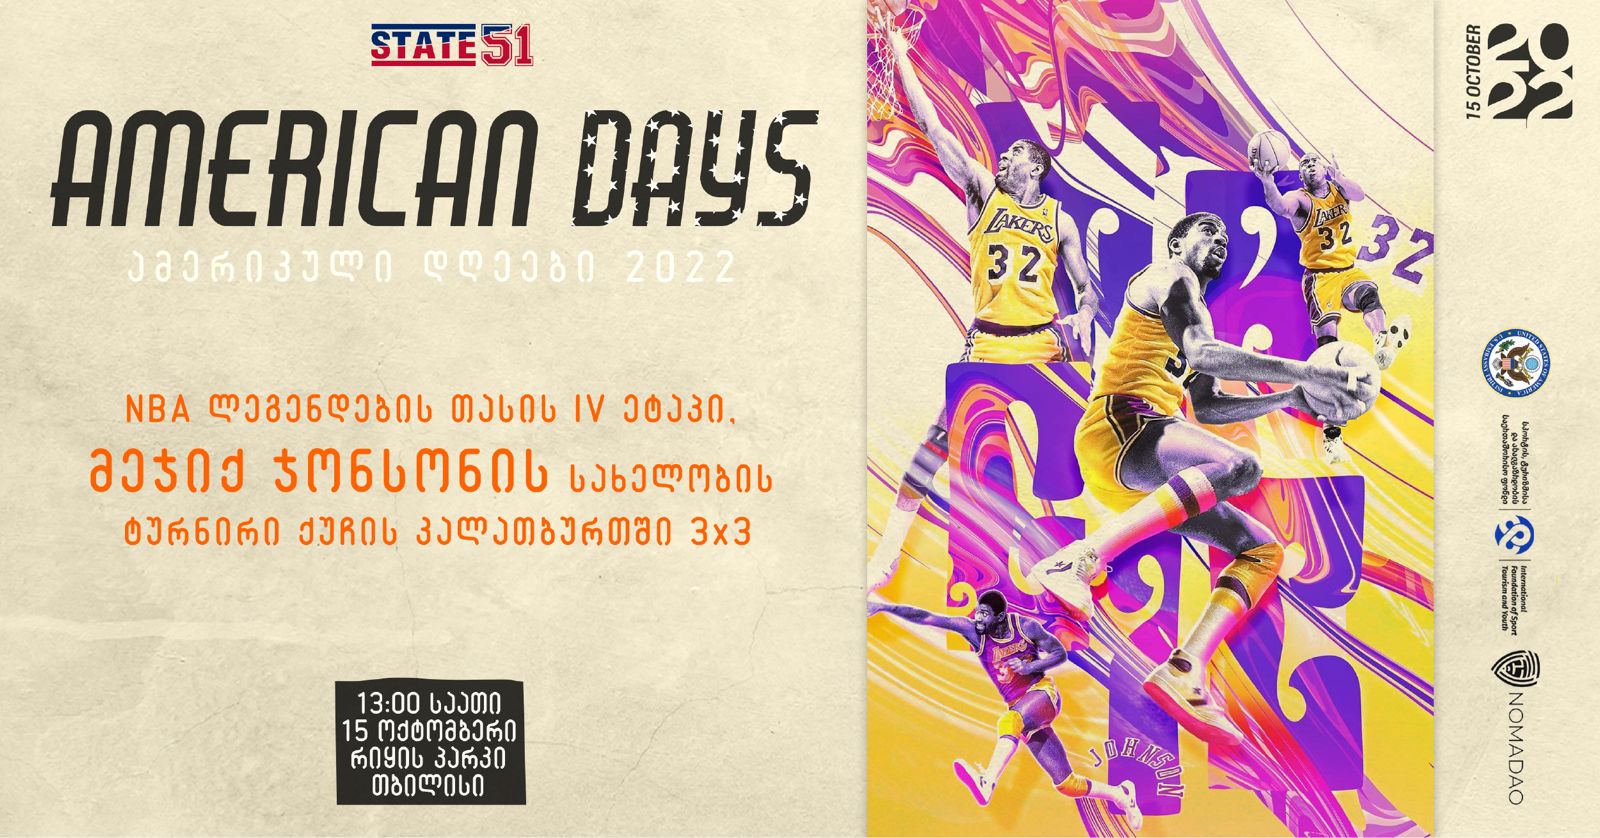 American Days 2022 Will Start on October 15th